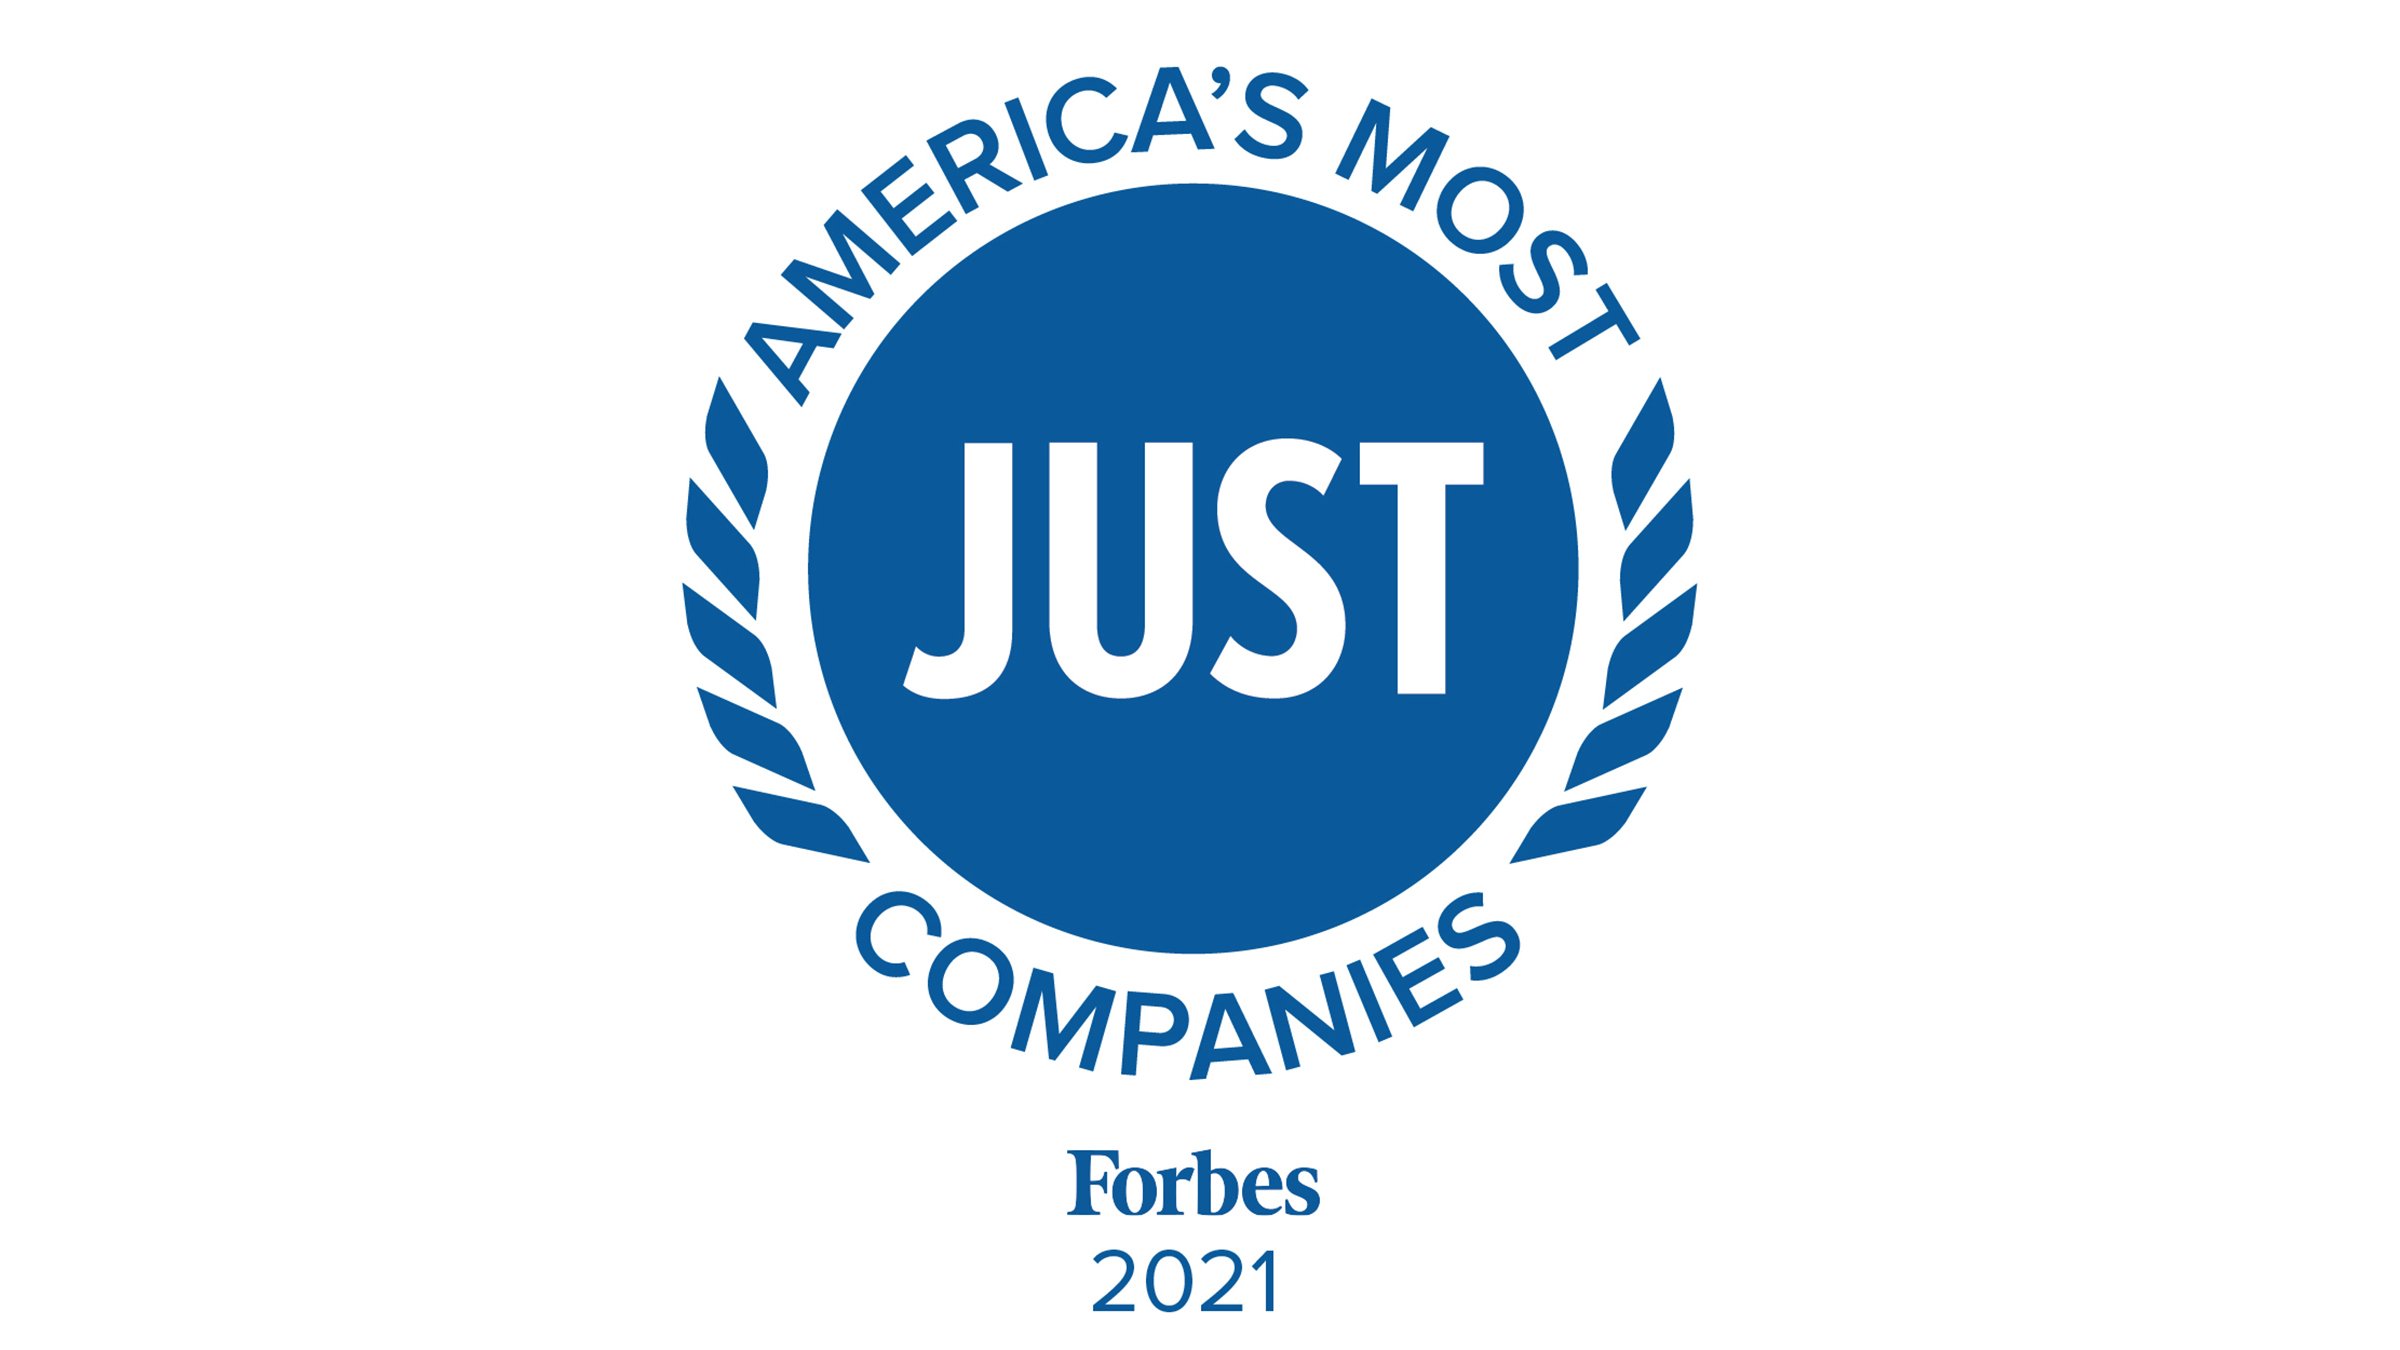 America's Most Just Companies Forbes 2021 logo